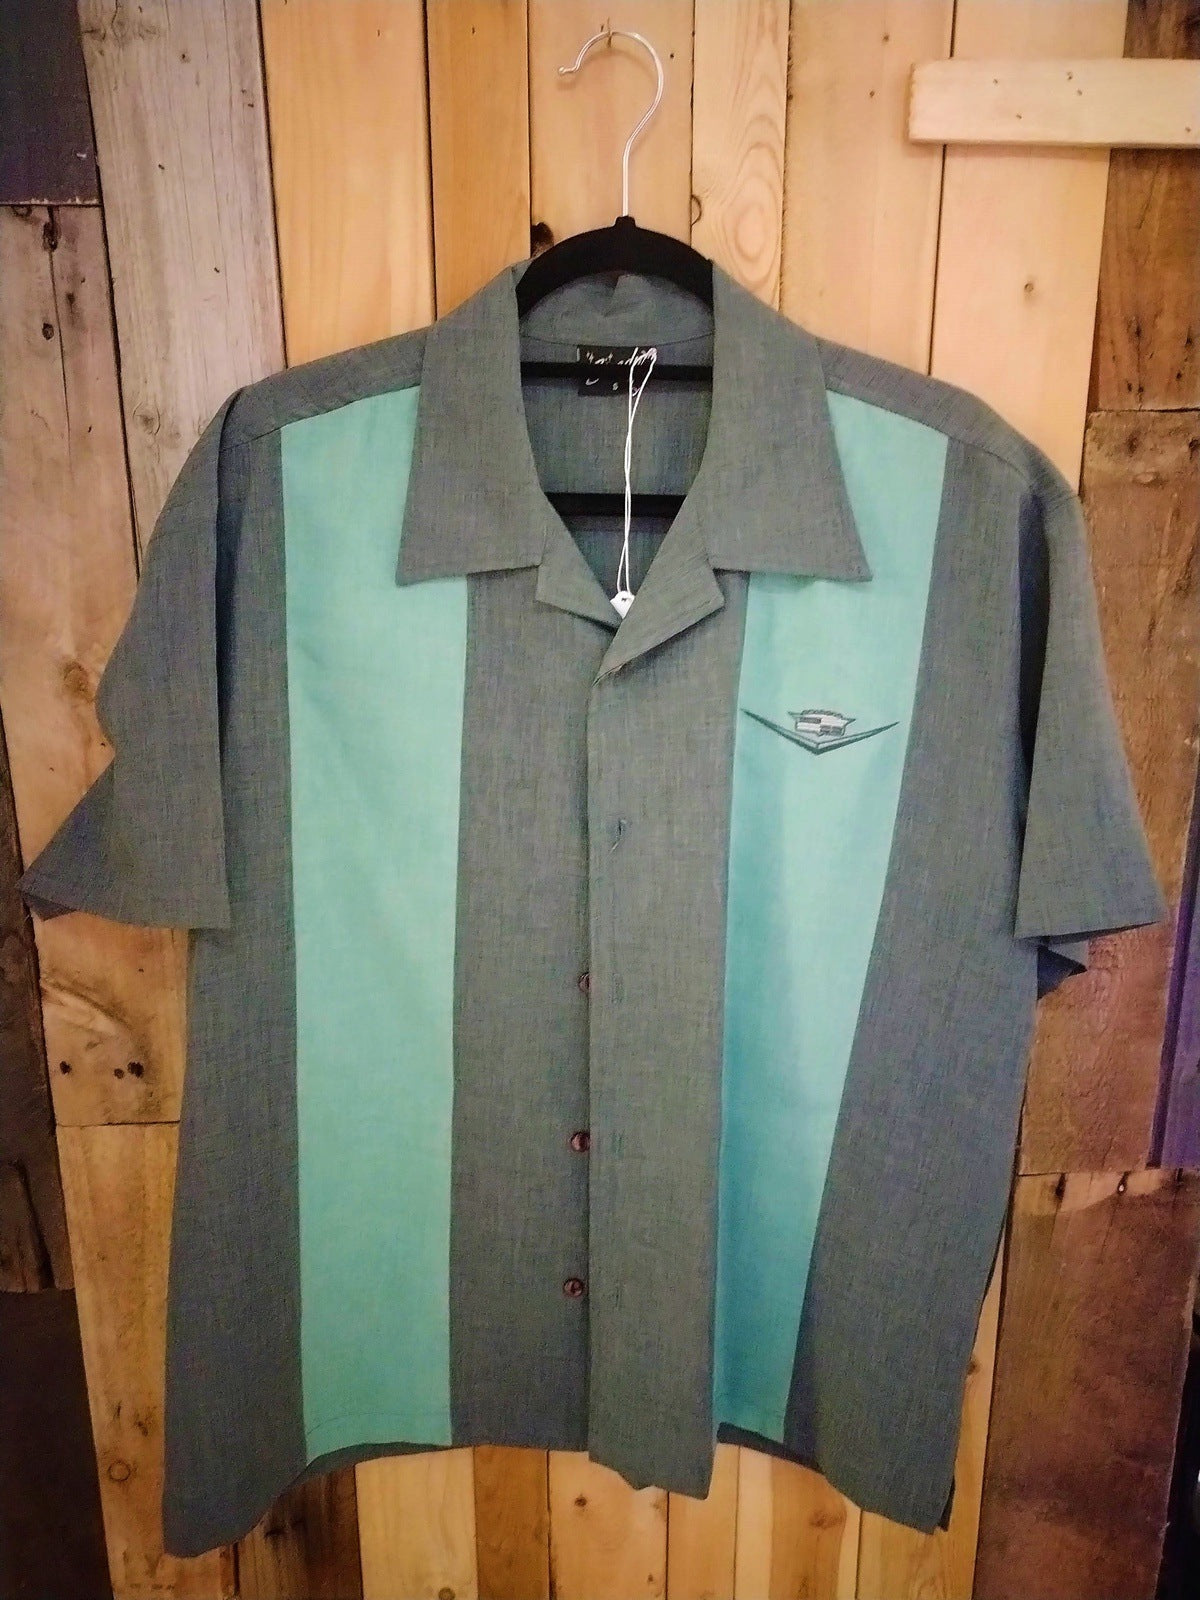 Steady Brand Men's 50's Style Shirt Cadillac Logo Size Small